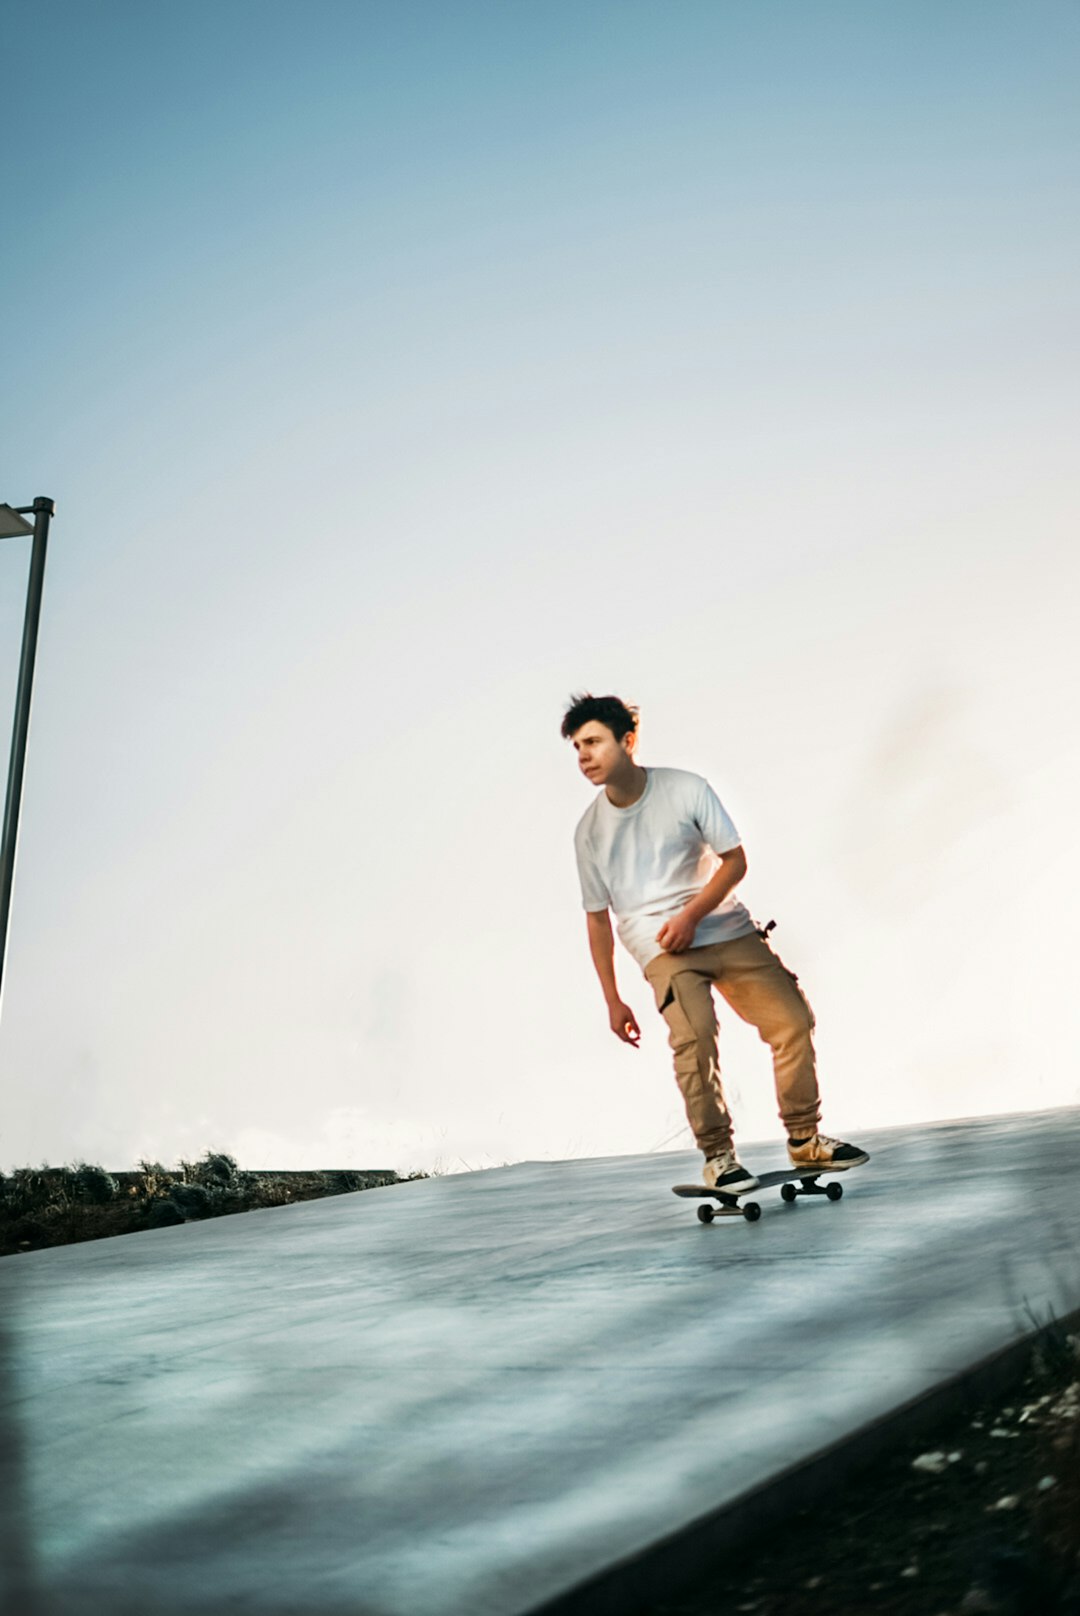 man in white t-shirt and brown shorts standing on skateboard during daytime